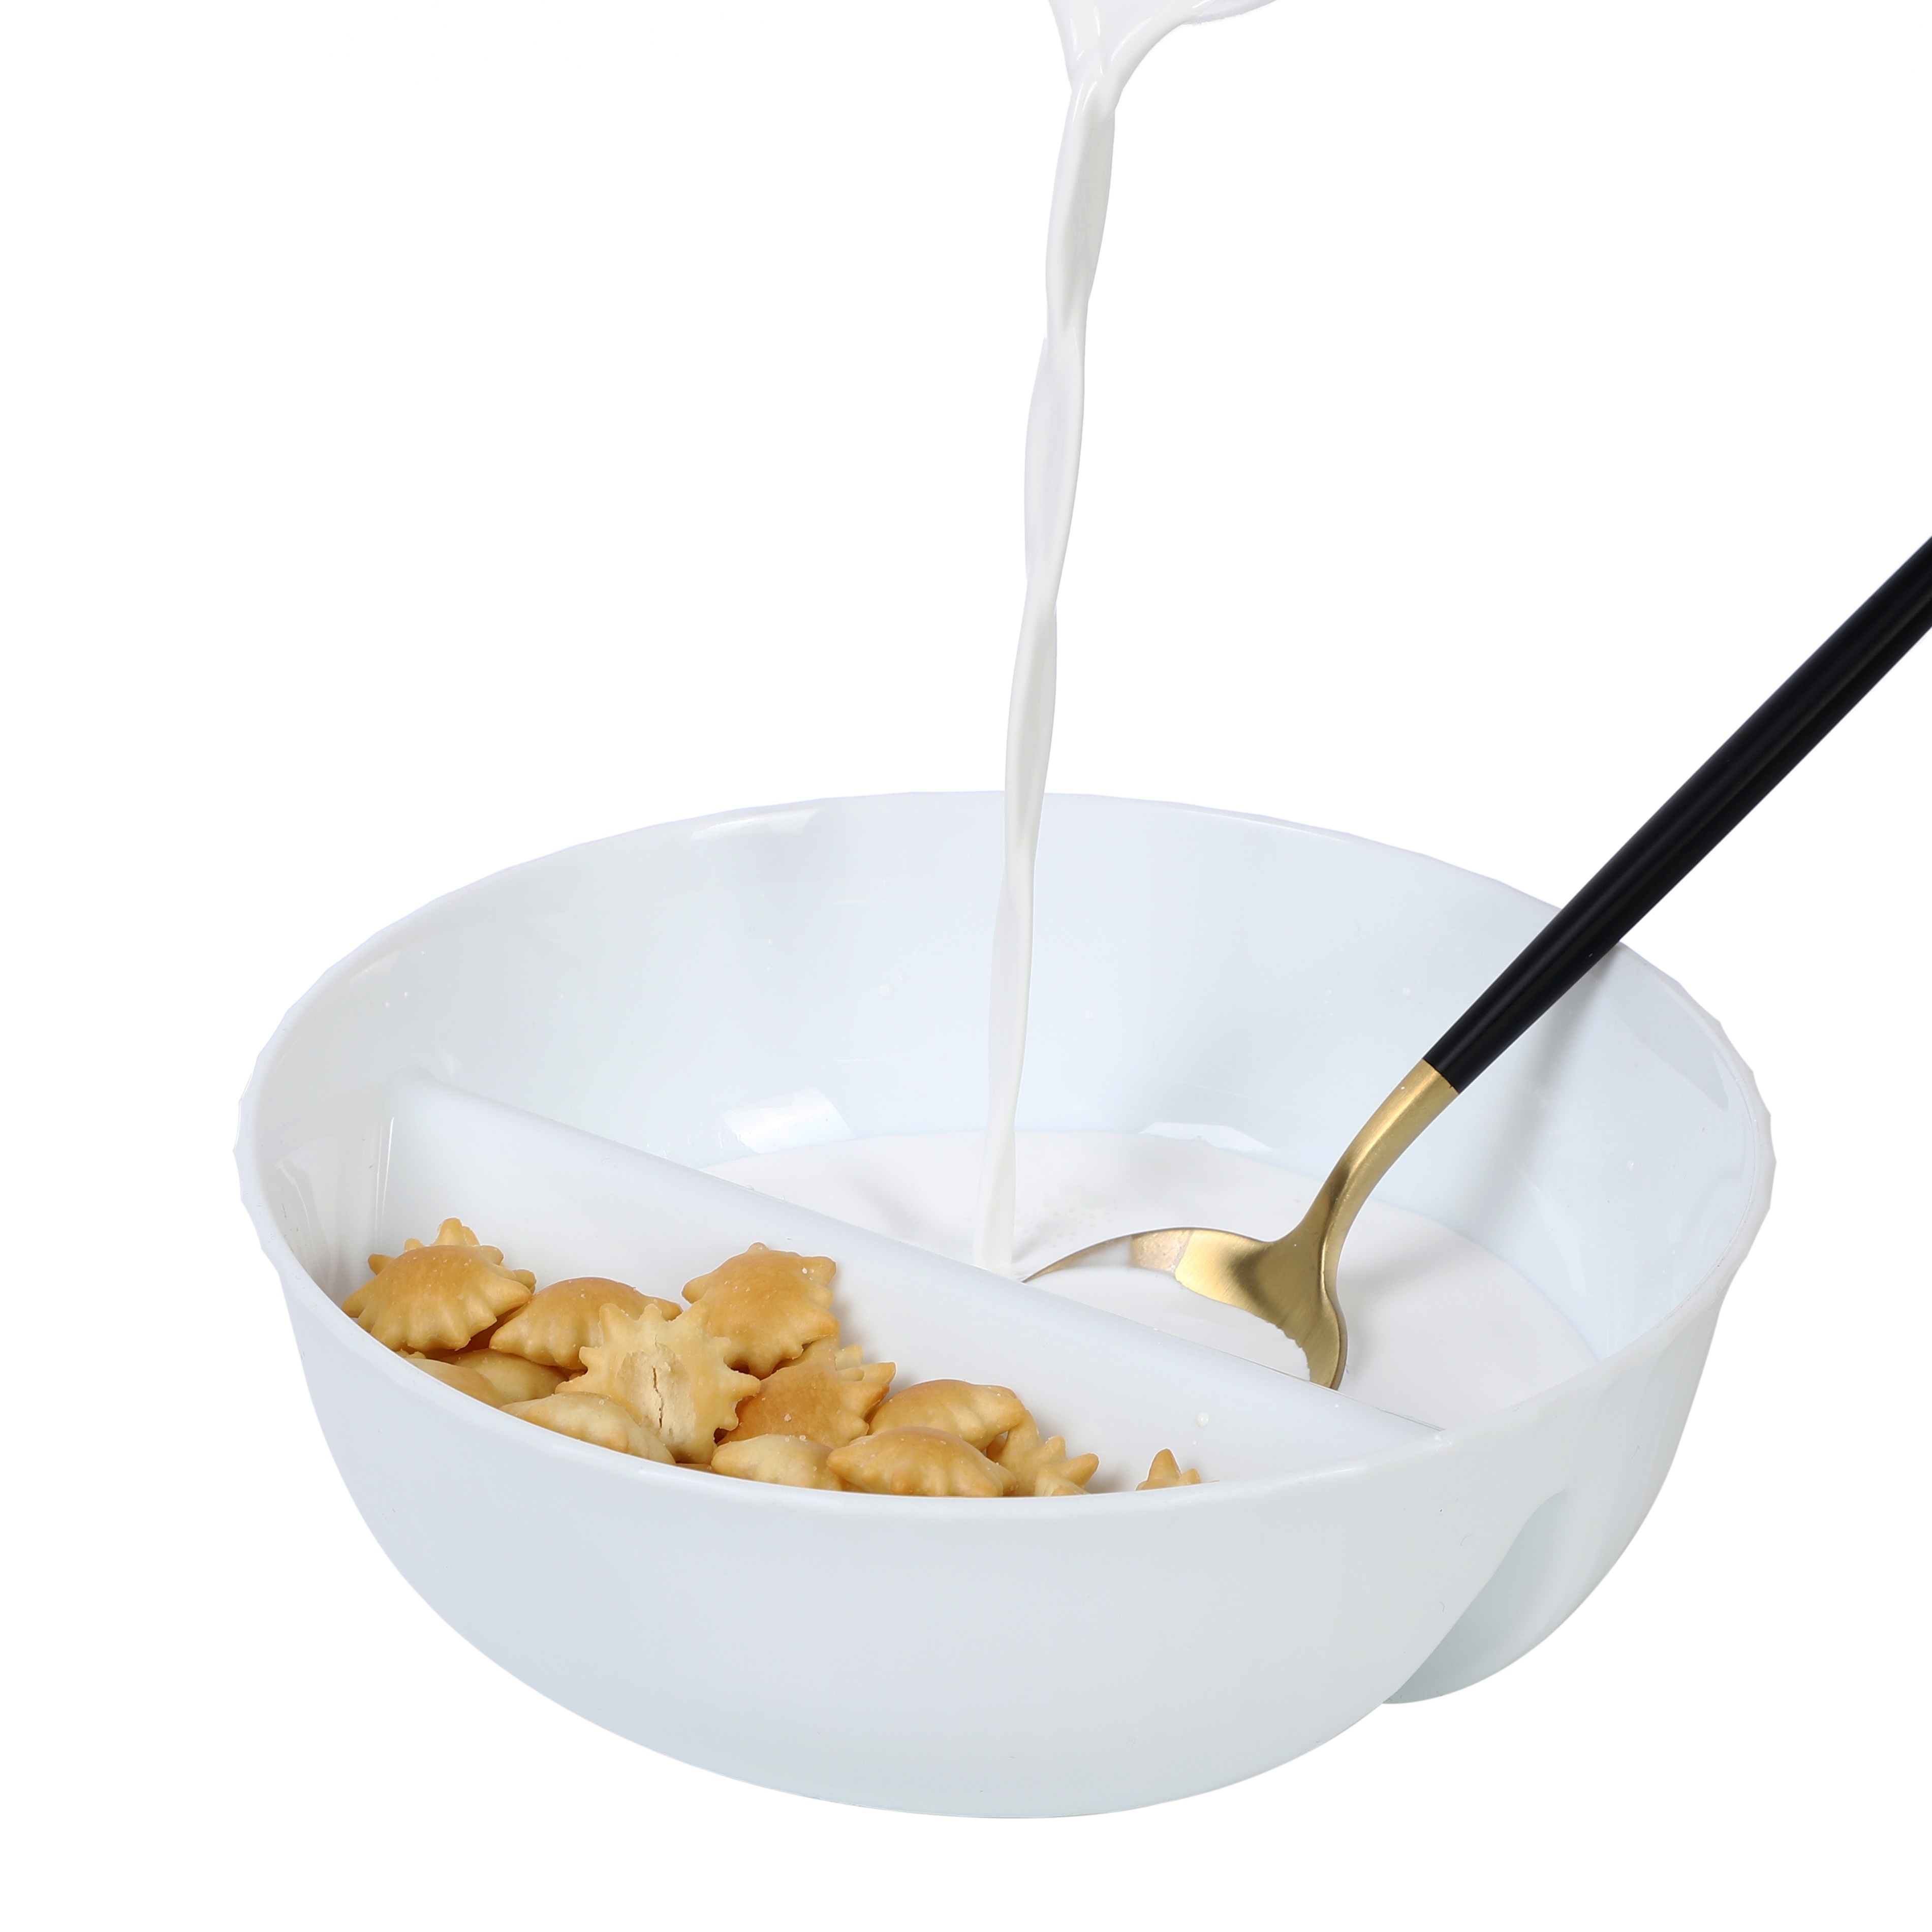 Shoppers Use This Divided Cereal Bowl for Everything